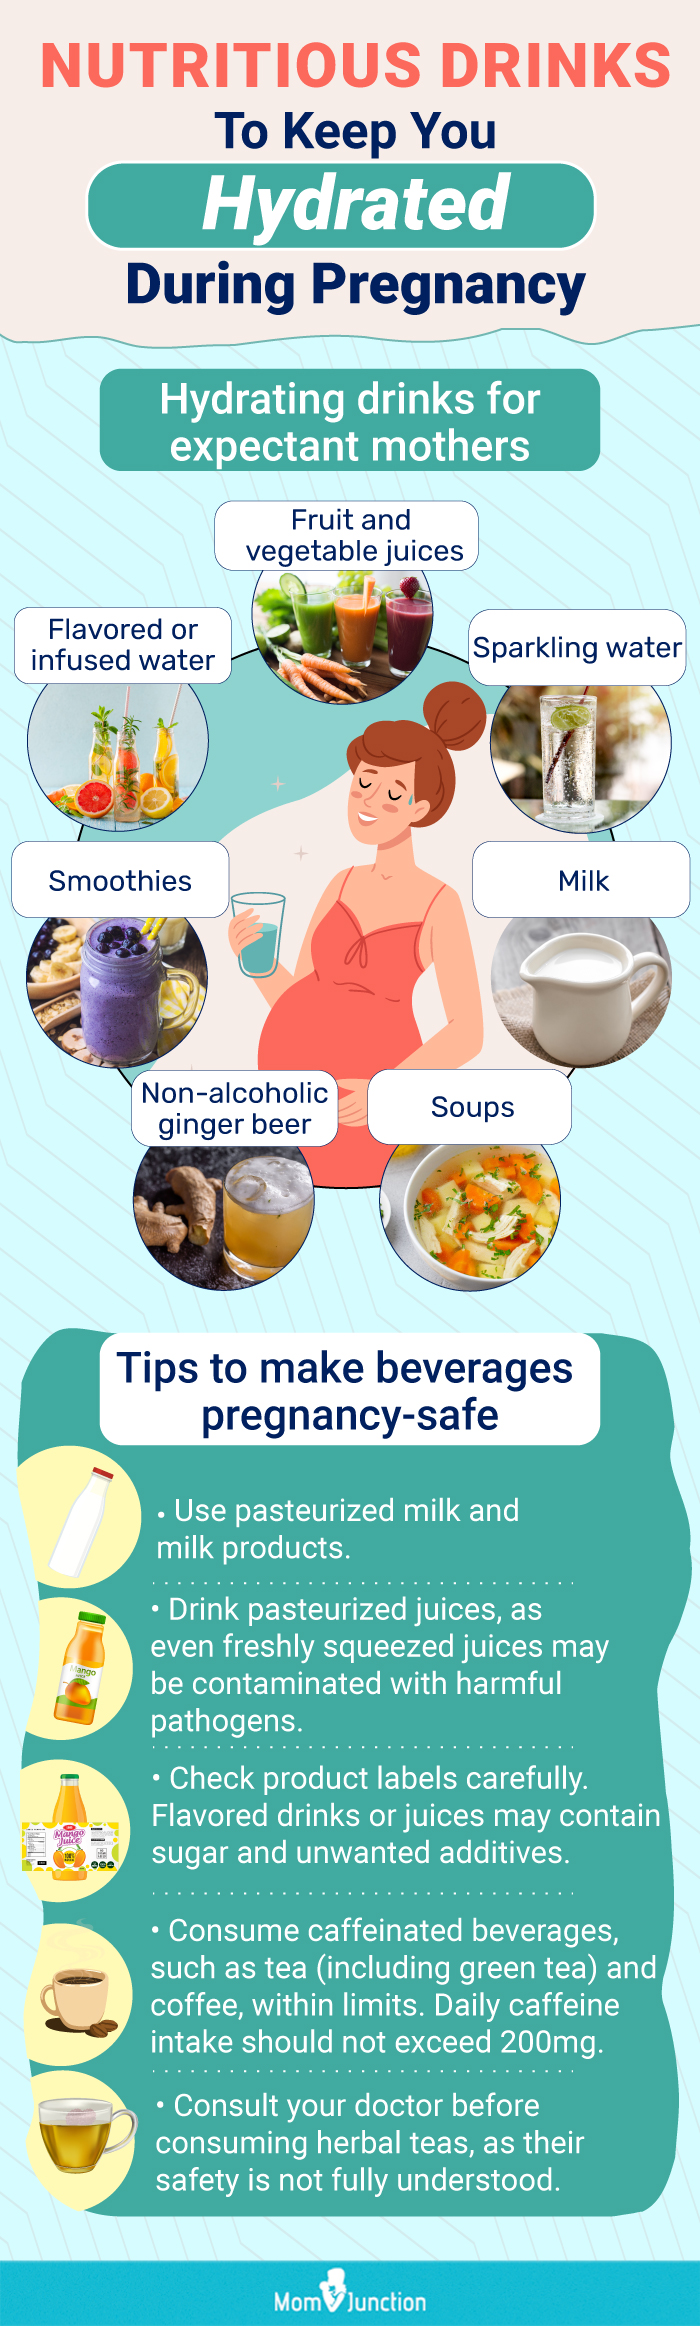 pregnancy safe hydrating beverages for moms to be (infographic)